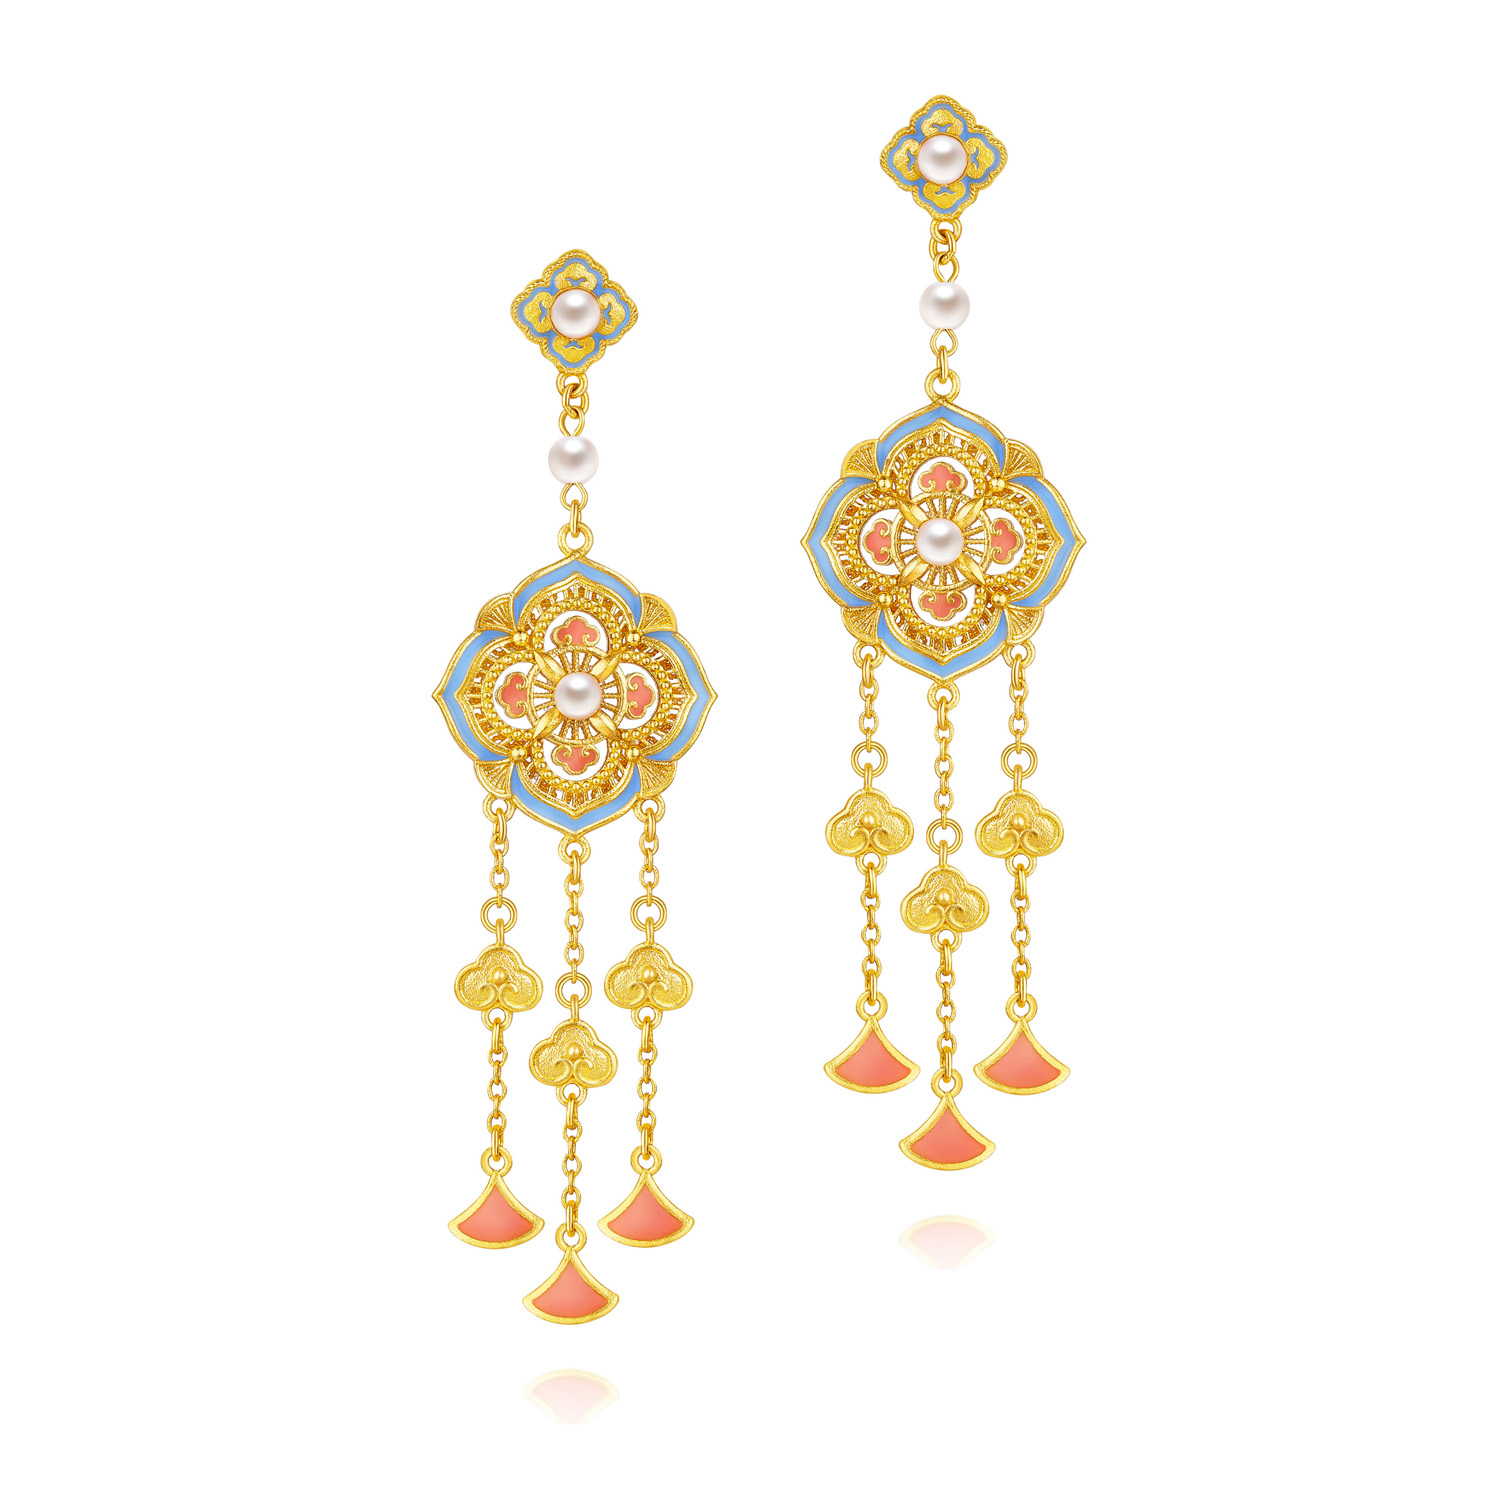 Heirloom Fortune - Charm of Song Dynasty Collection "Exquisite Knot" Gold Pearl Earrings